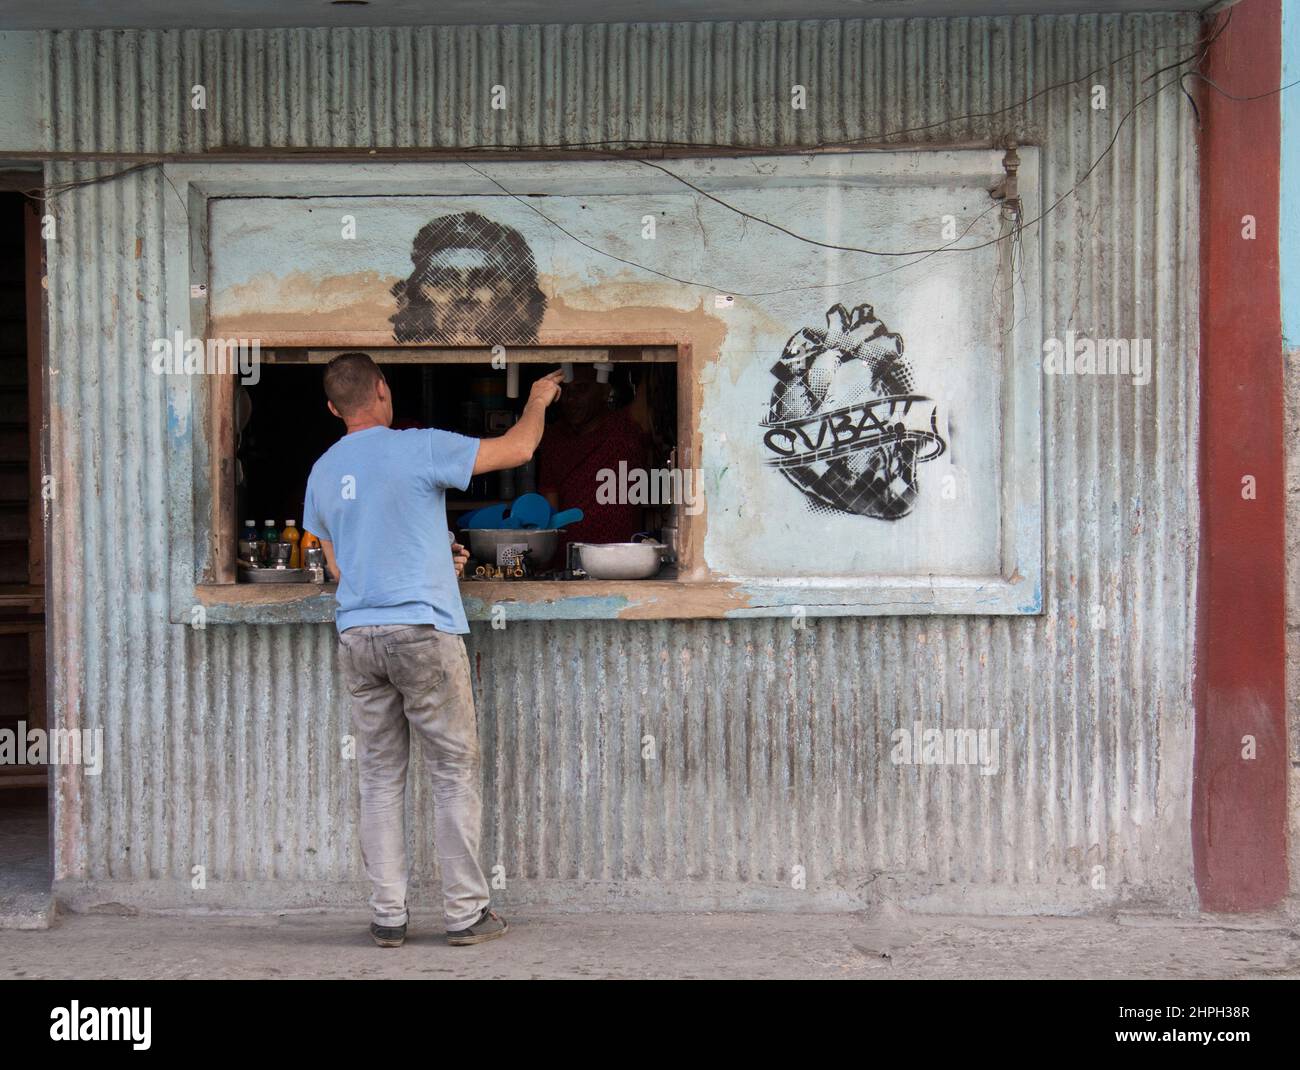 Man at a shop buying goods with a mural of Cuban hero Che Guevara on window sill. Stock Photo